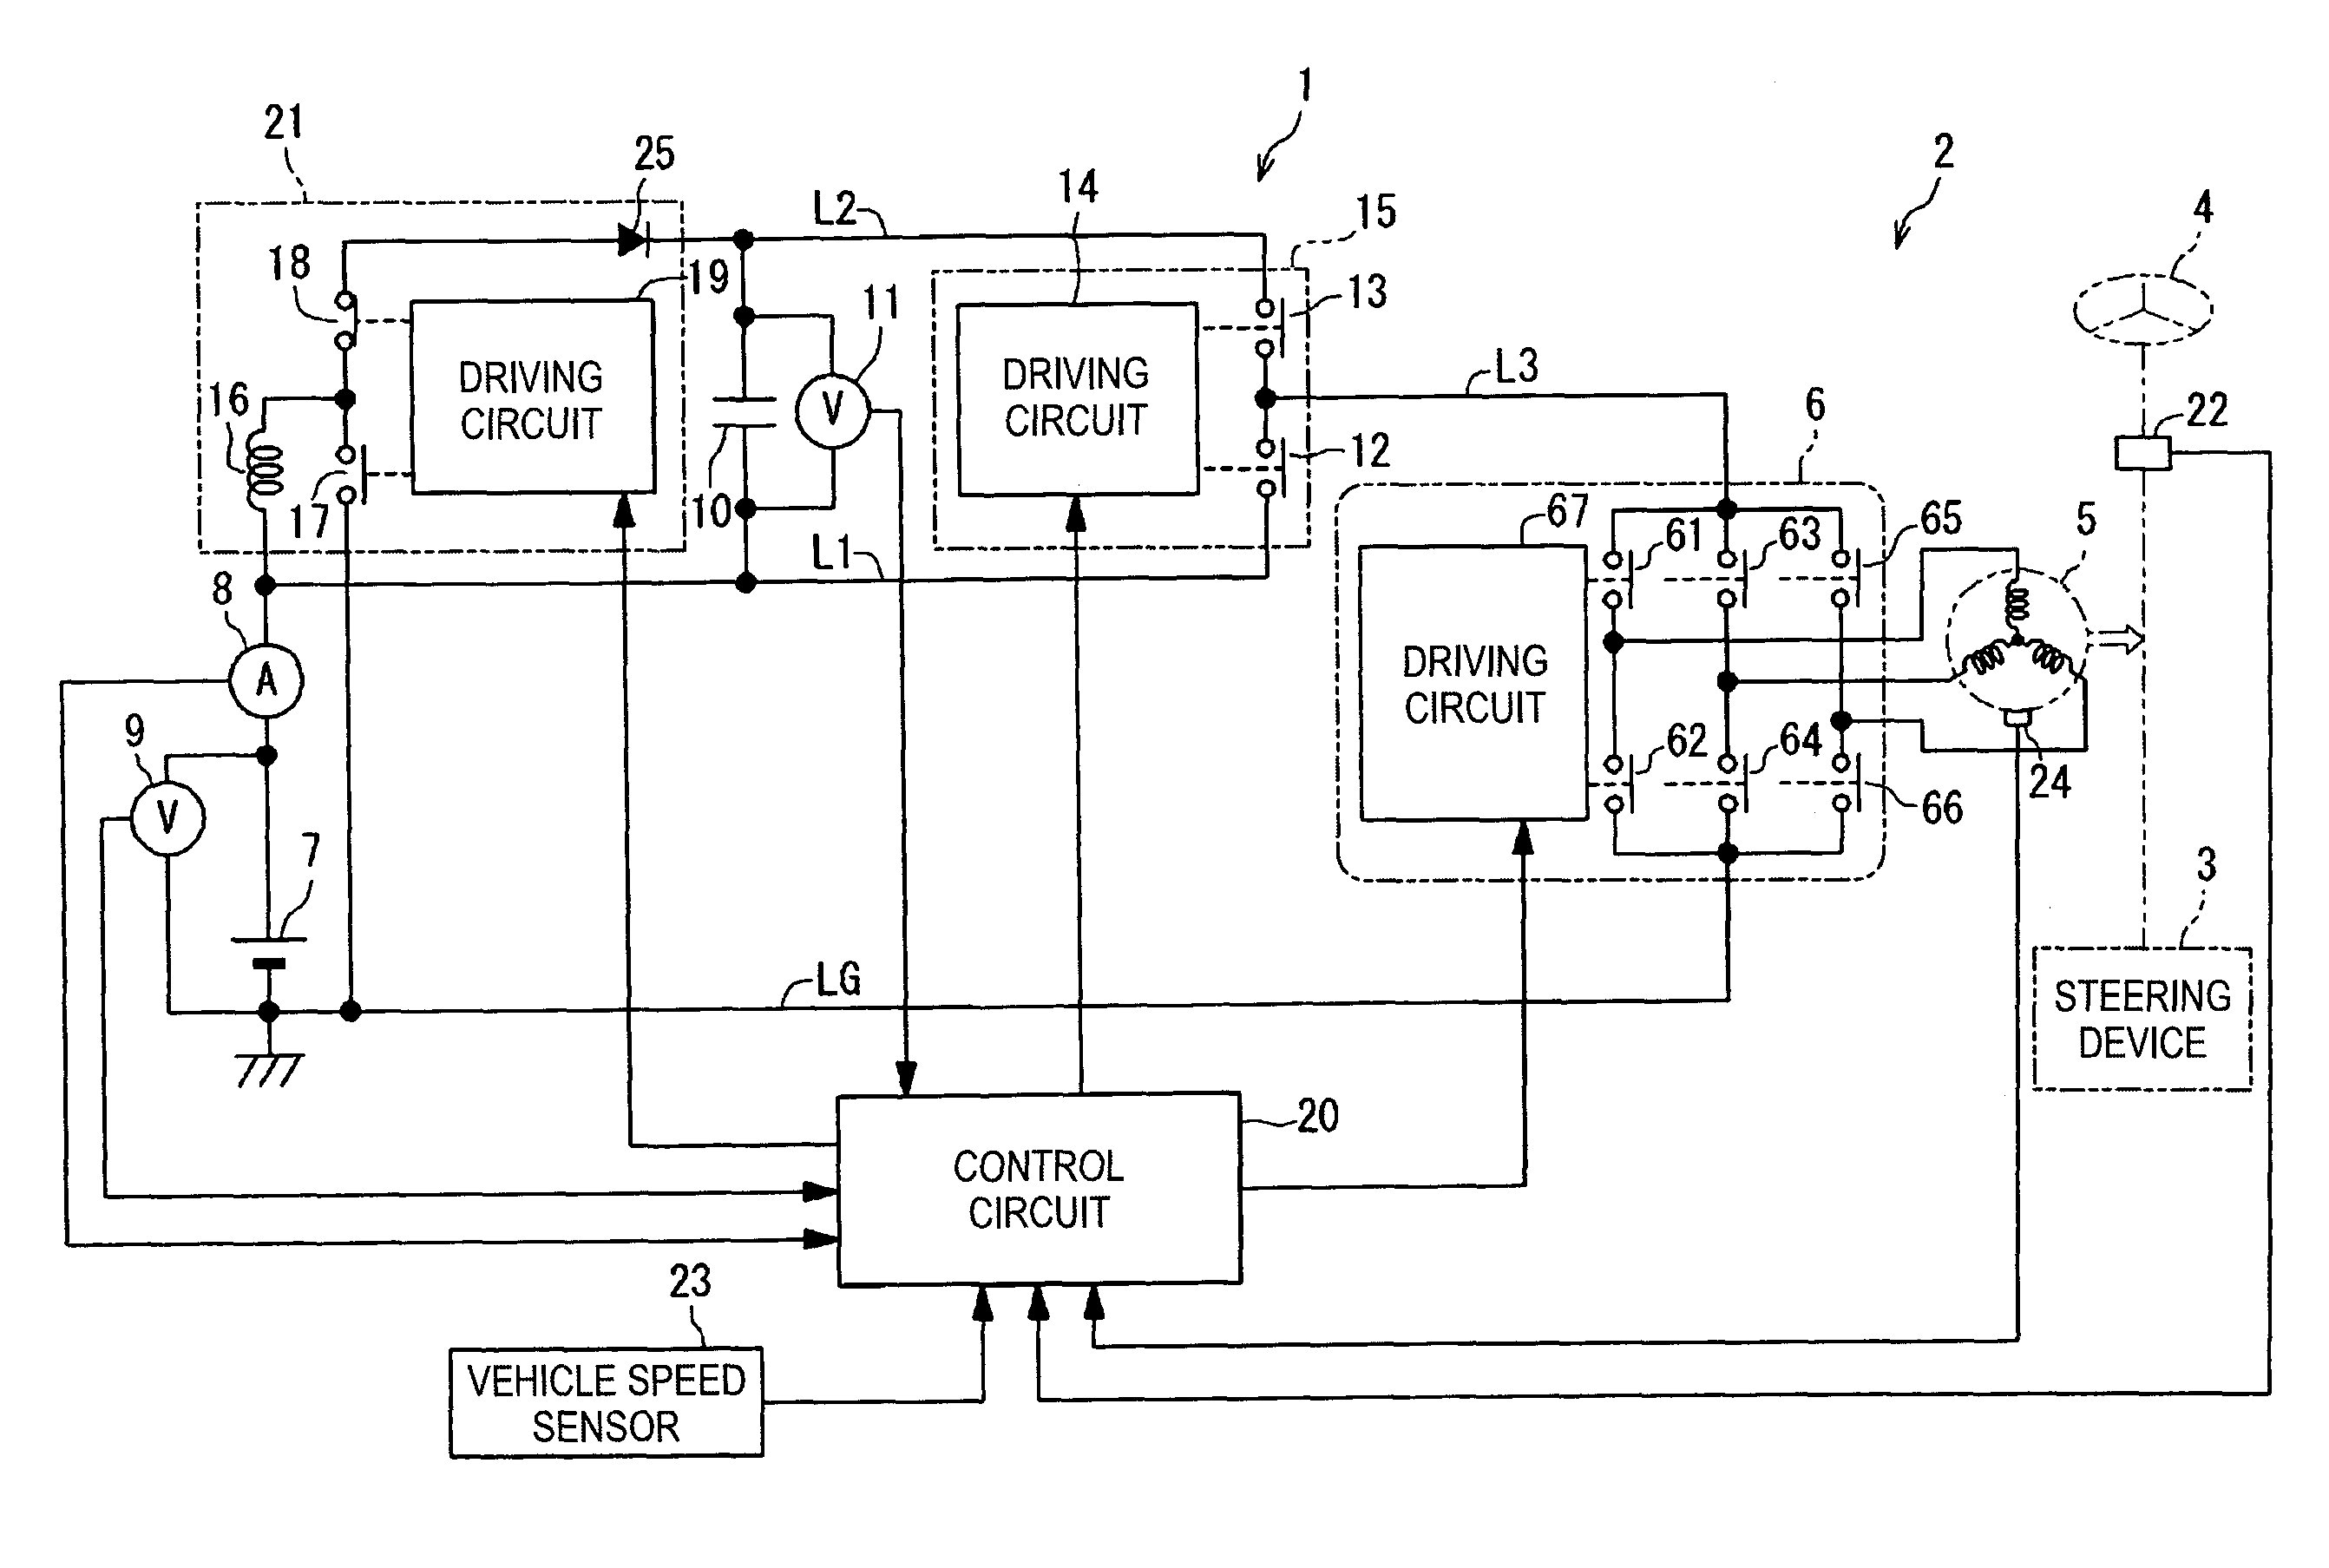 Auxiliary power supply device and electric power steering device